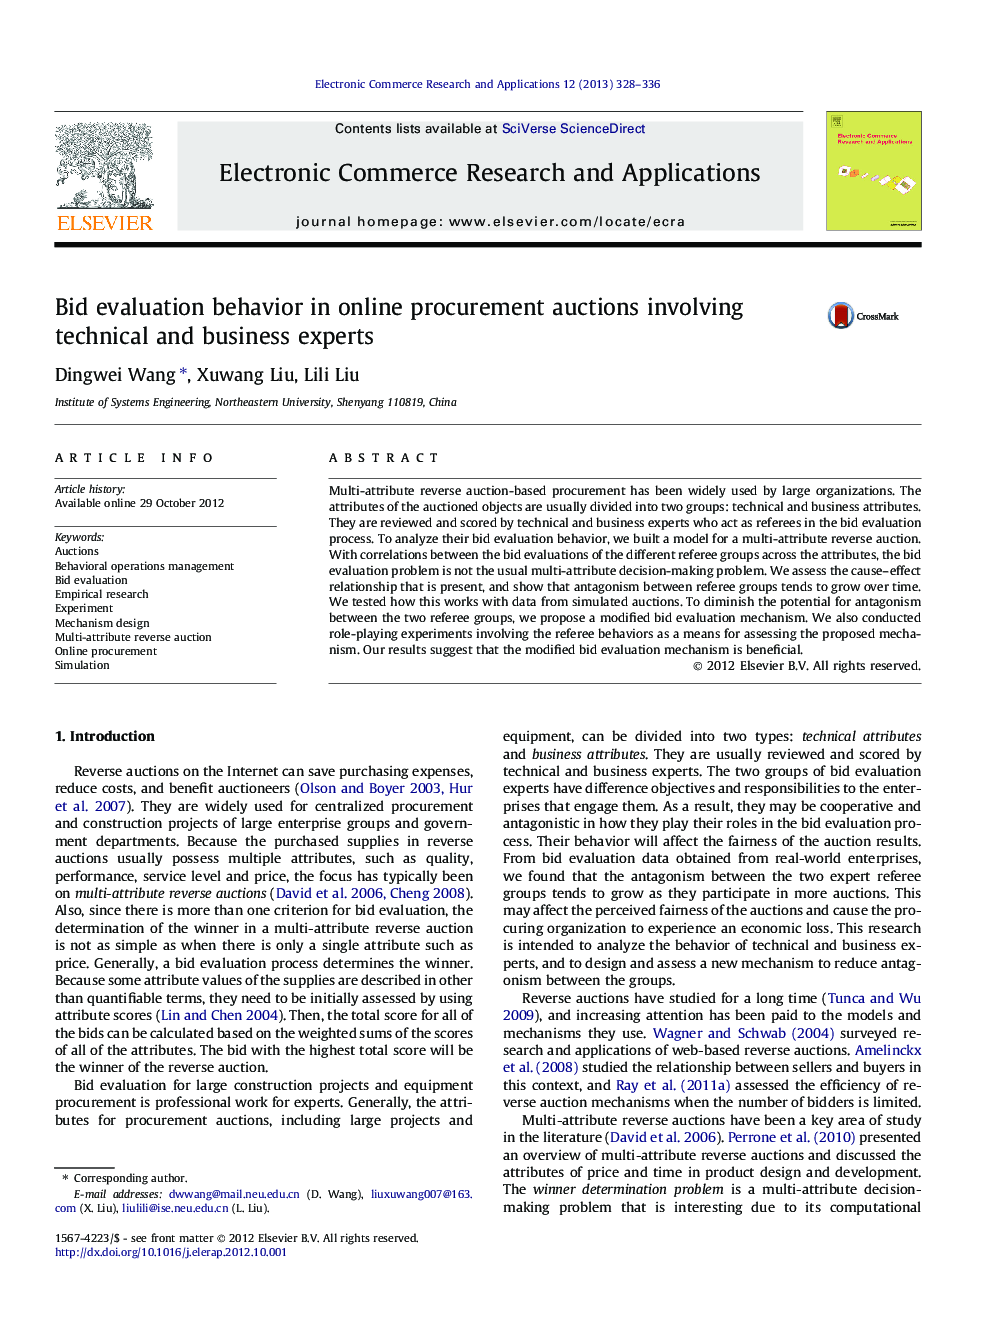 Bid evaluation behavior in online procurement auctions involving technical and business experts